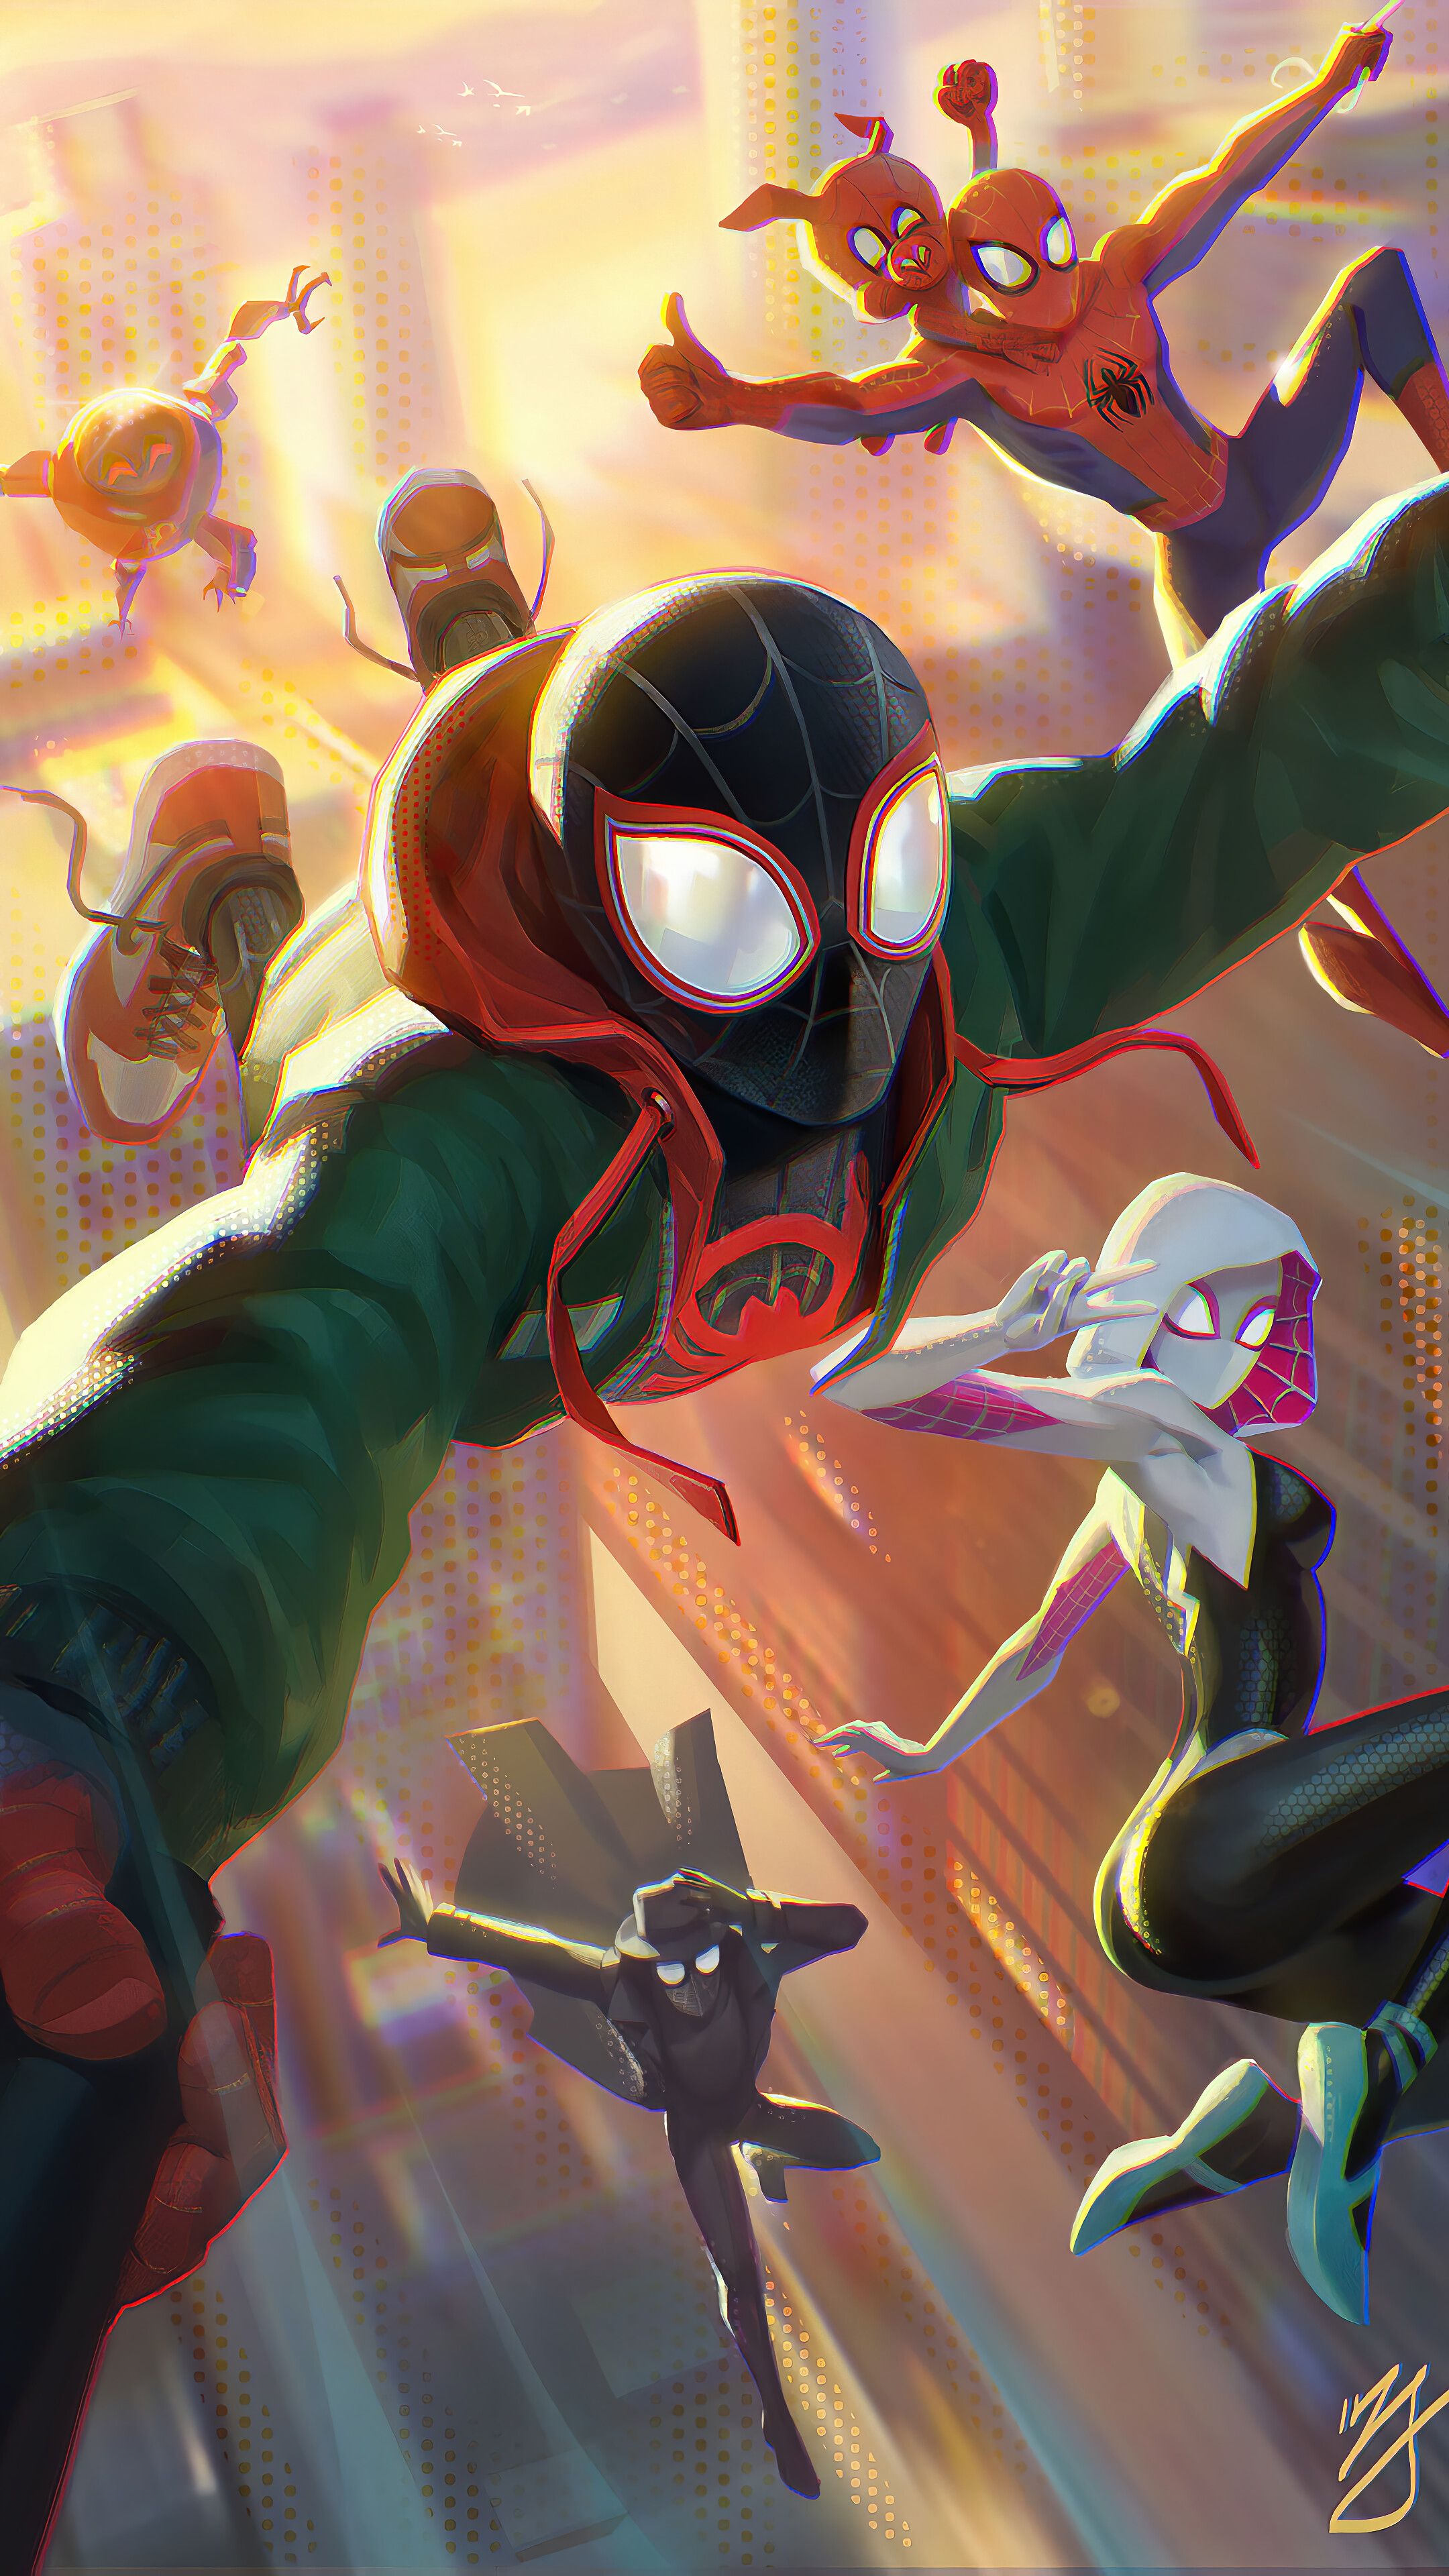 Celebrity Rumor: Spider Man Miles Morales Phone Wallpaper, HD Wallpaper Illustration Of Spider Man Falling Down Miles Morales Spider Man Into The Spider Verse Wallpaper Flare / This frees up the